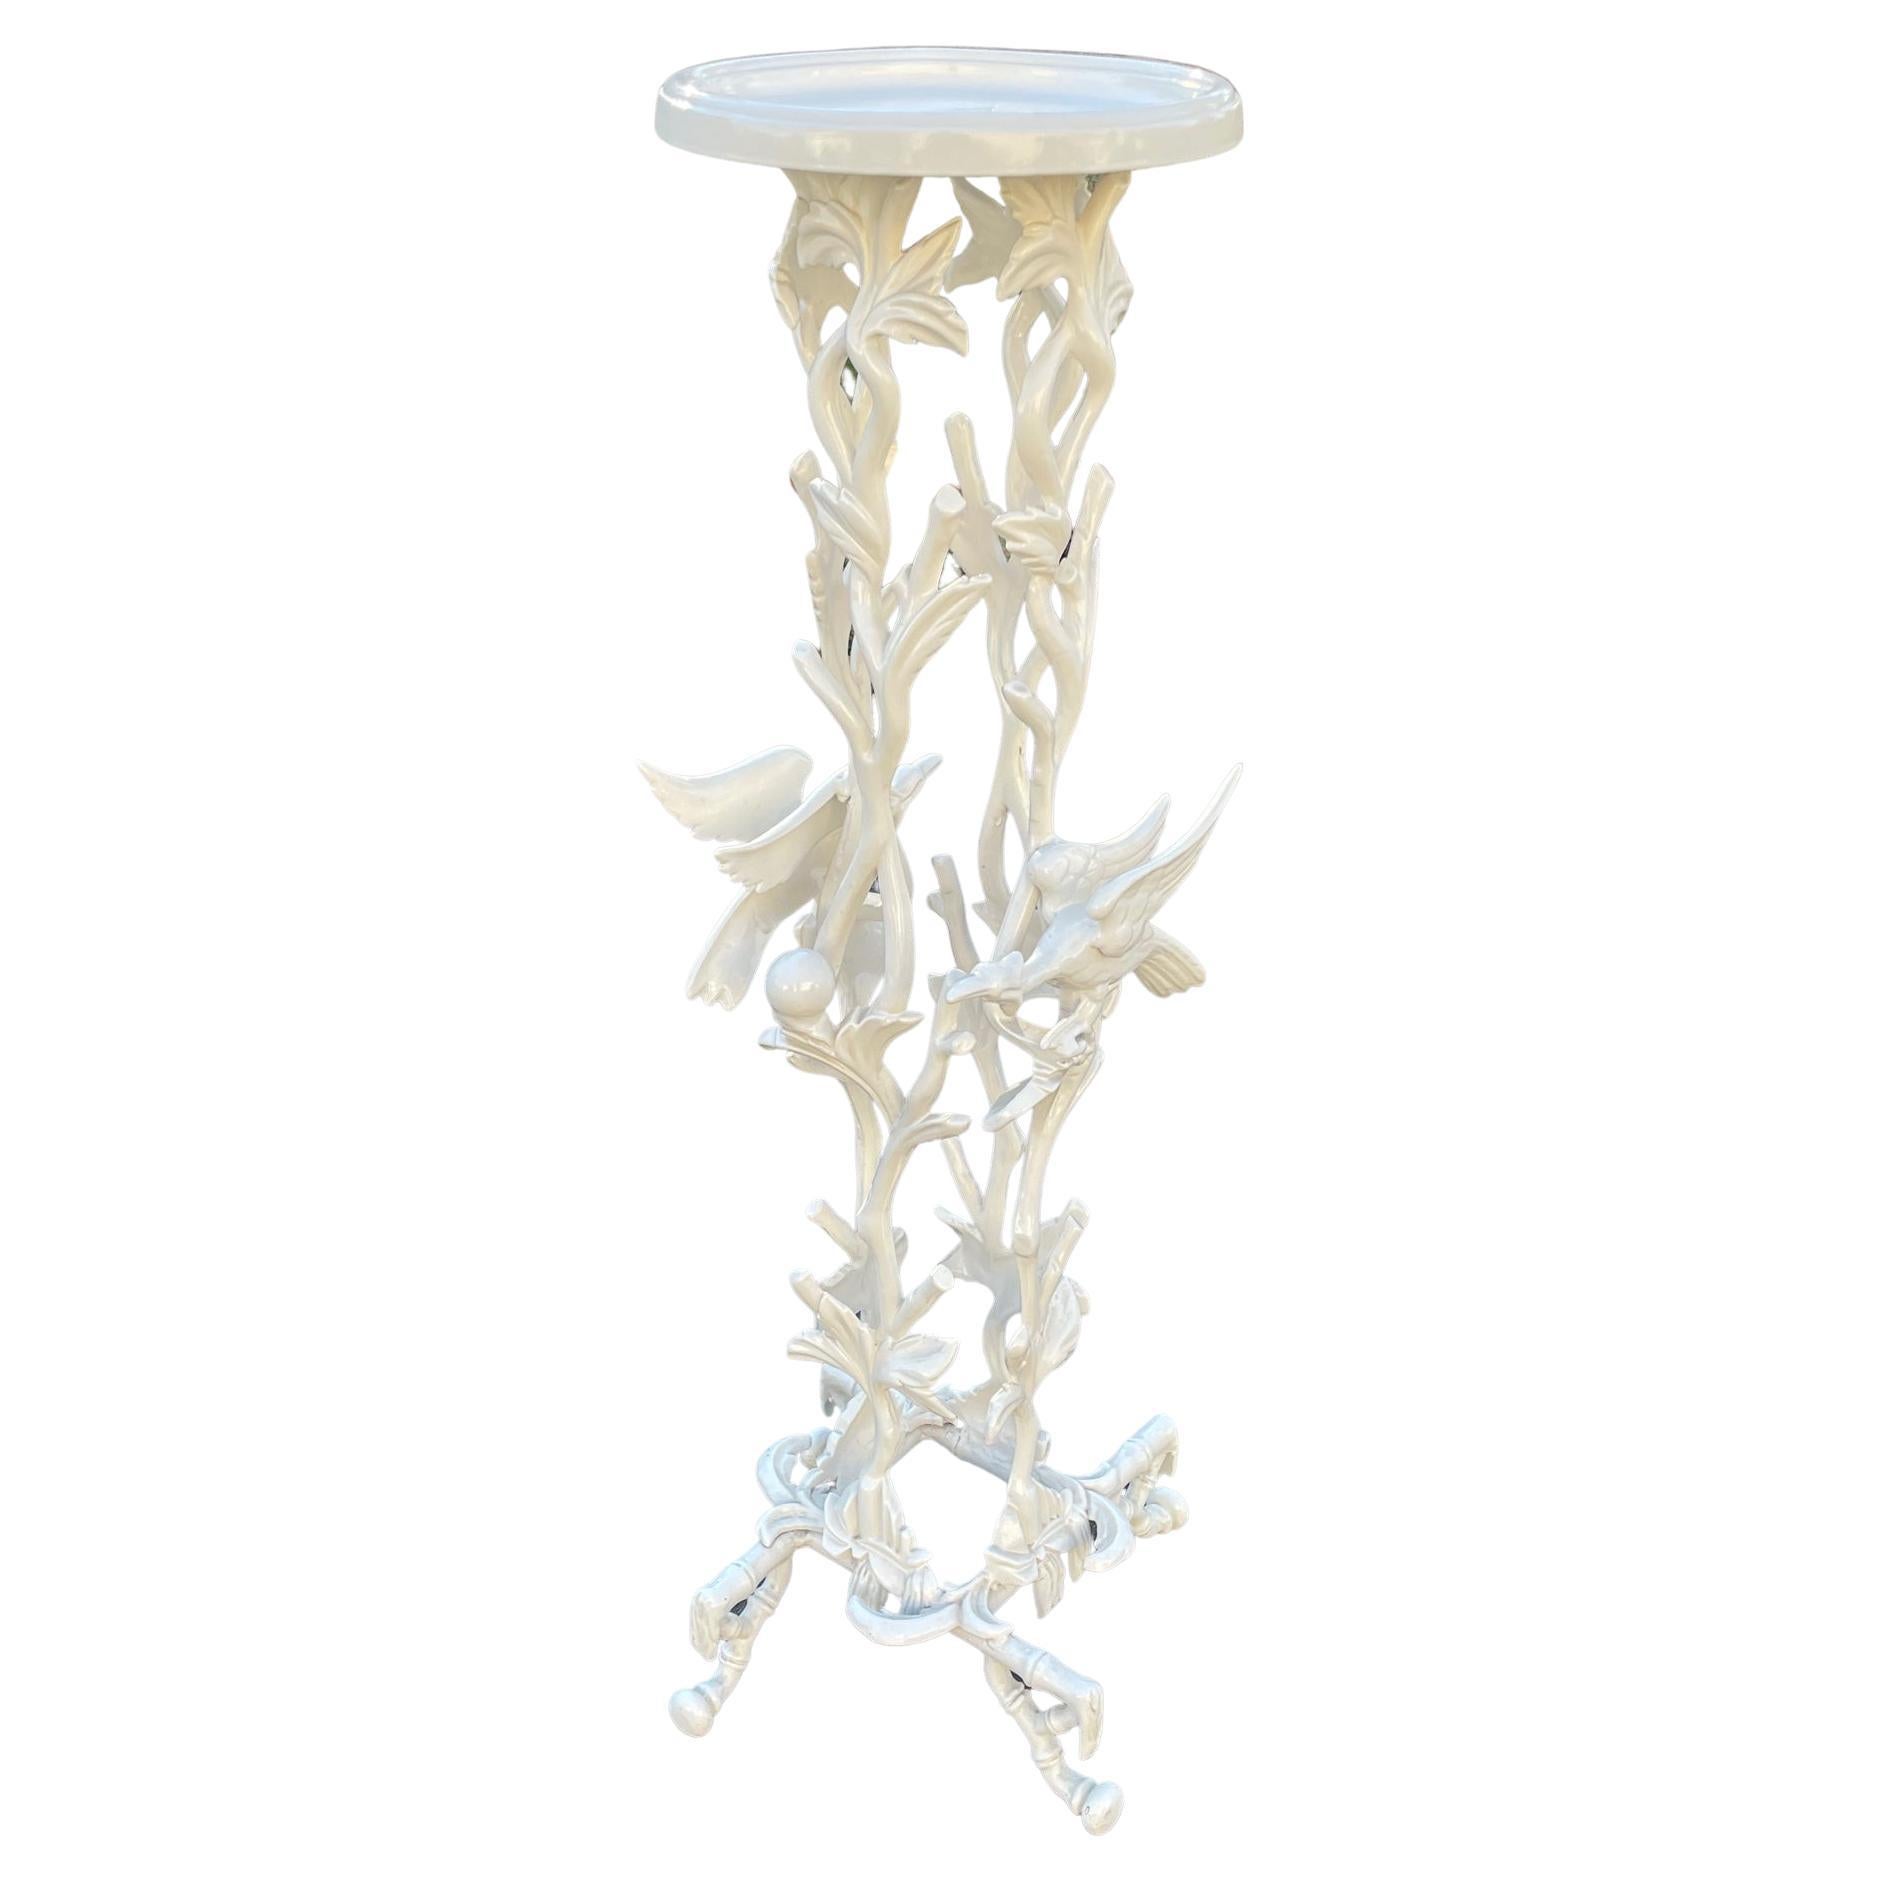 Magnificent Sculptural White Enamel Cast Iron Plant Stand with Birds and Foliage